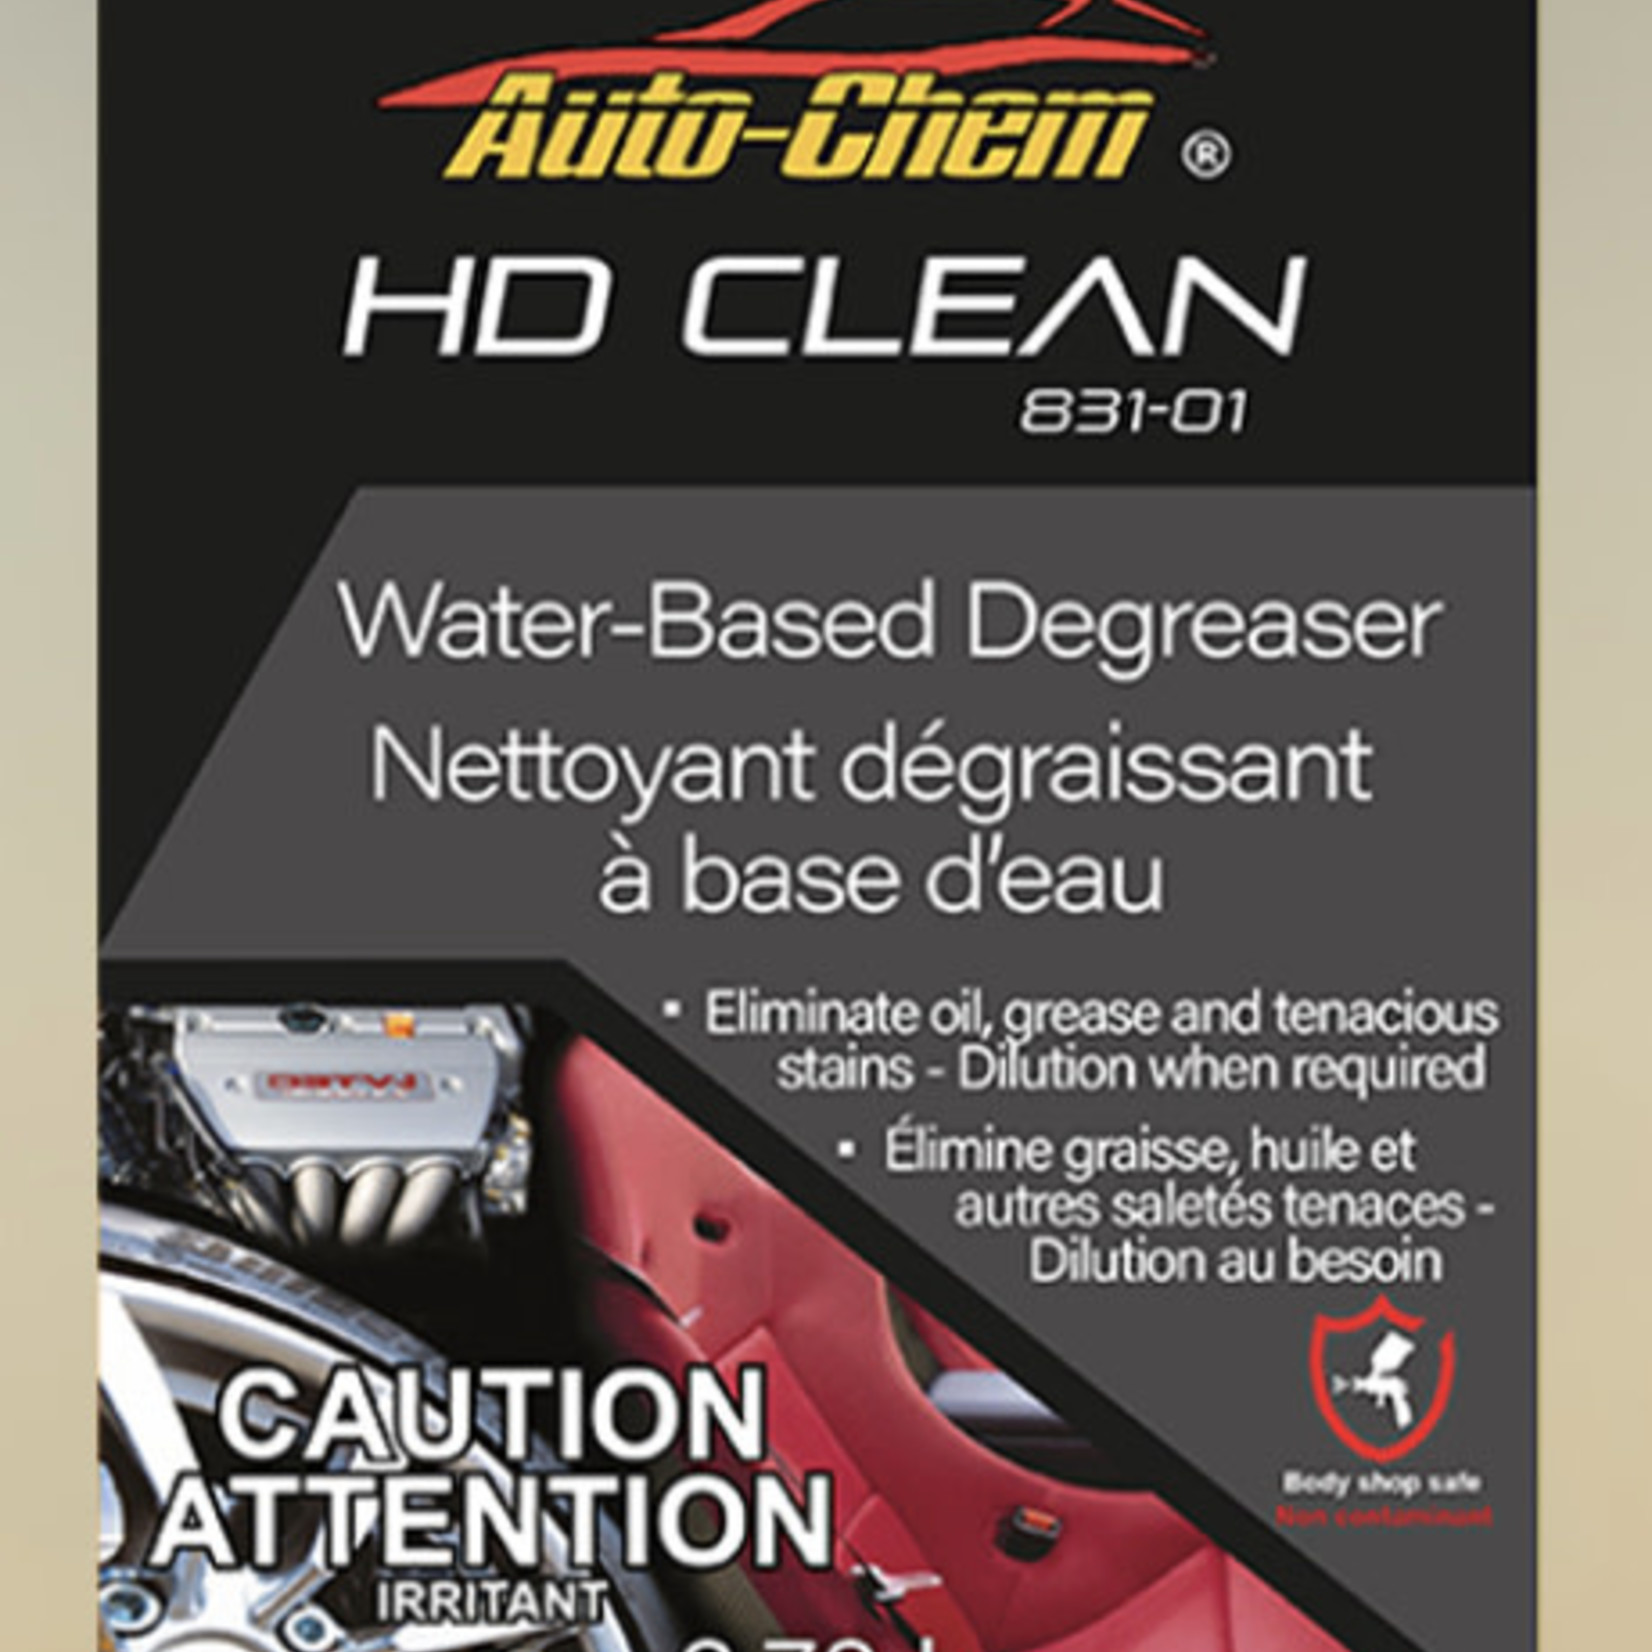 AUTO CHEM Auto-Chem HD CLEAN Water Based Degreaser